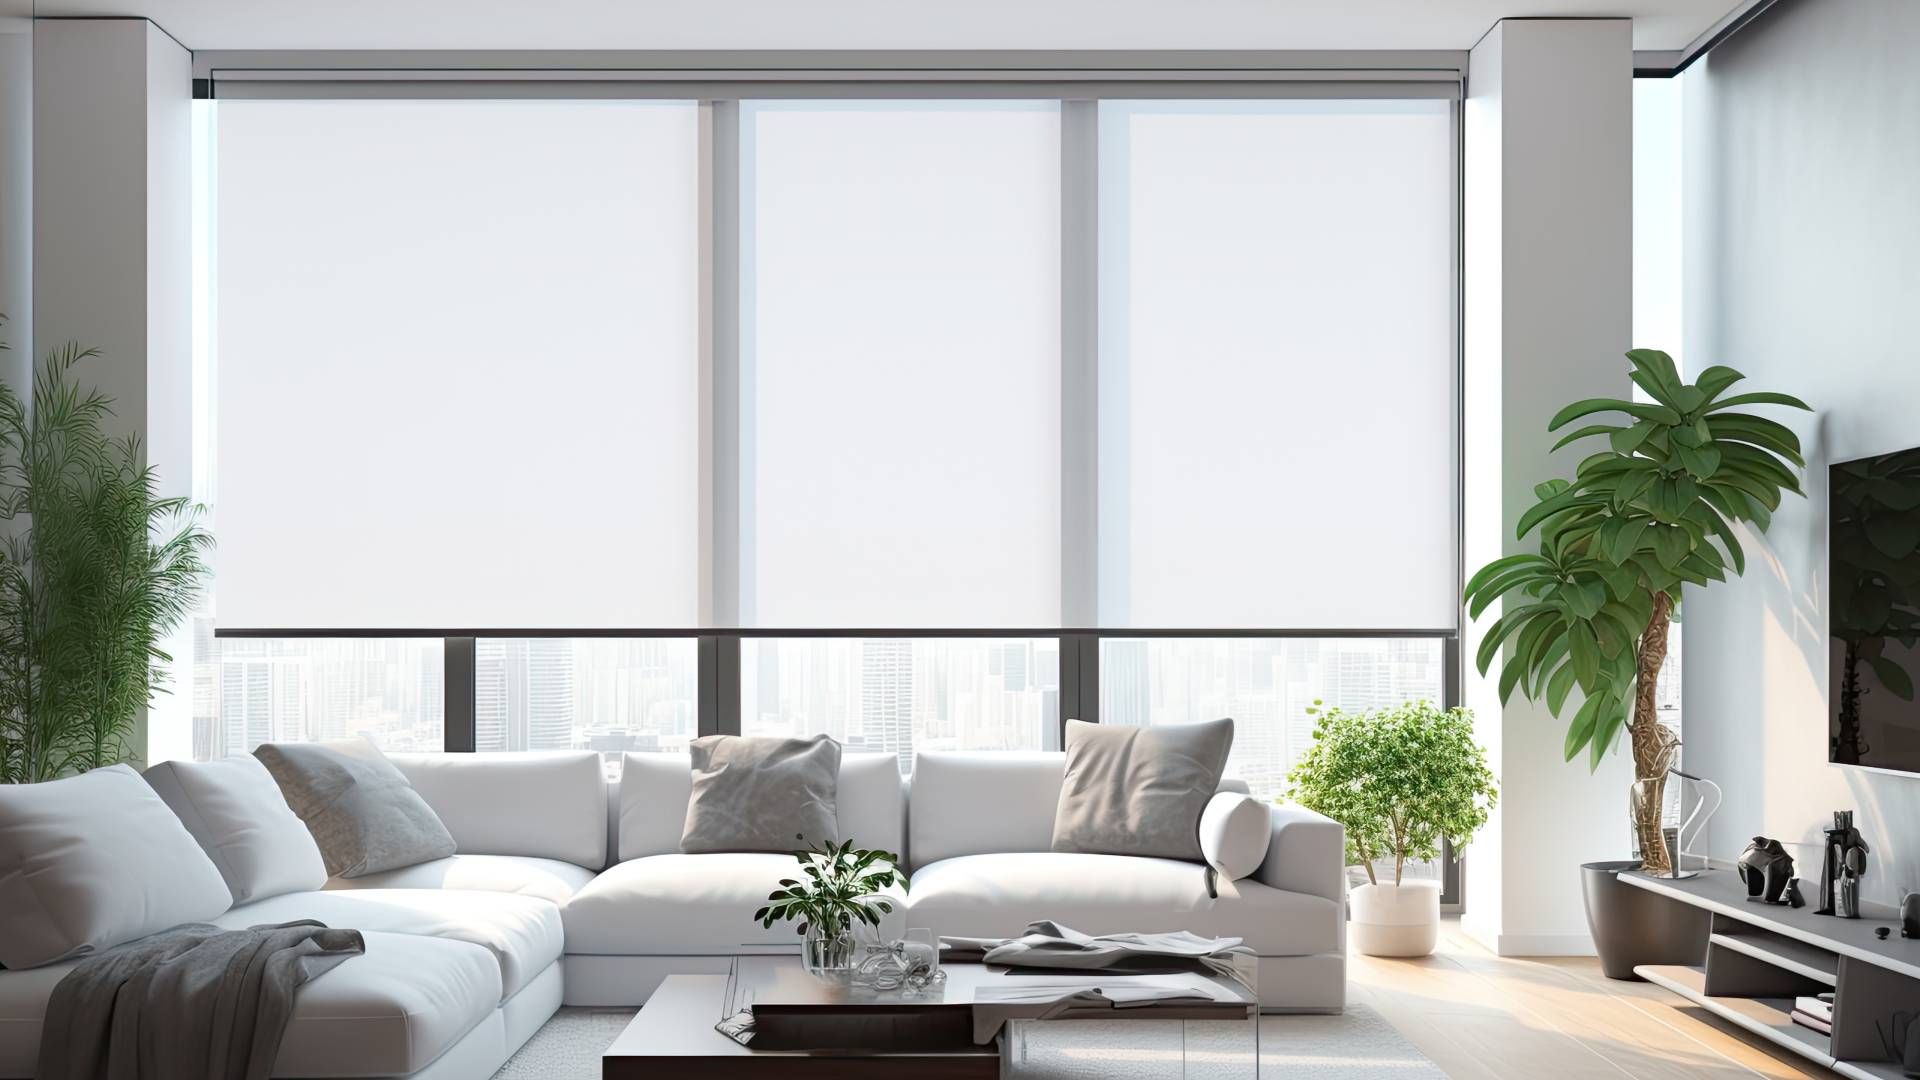 A living room with a white and neutral color scheme, outfitted with large motorized blinds near Glen